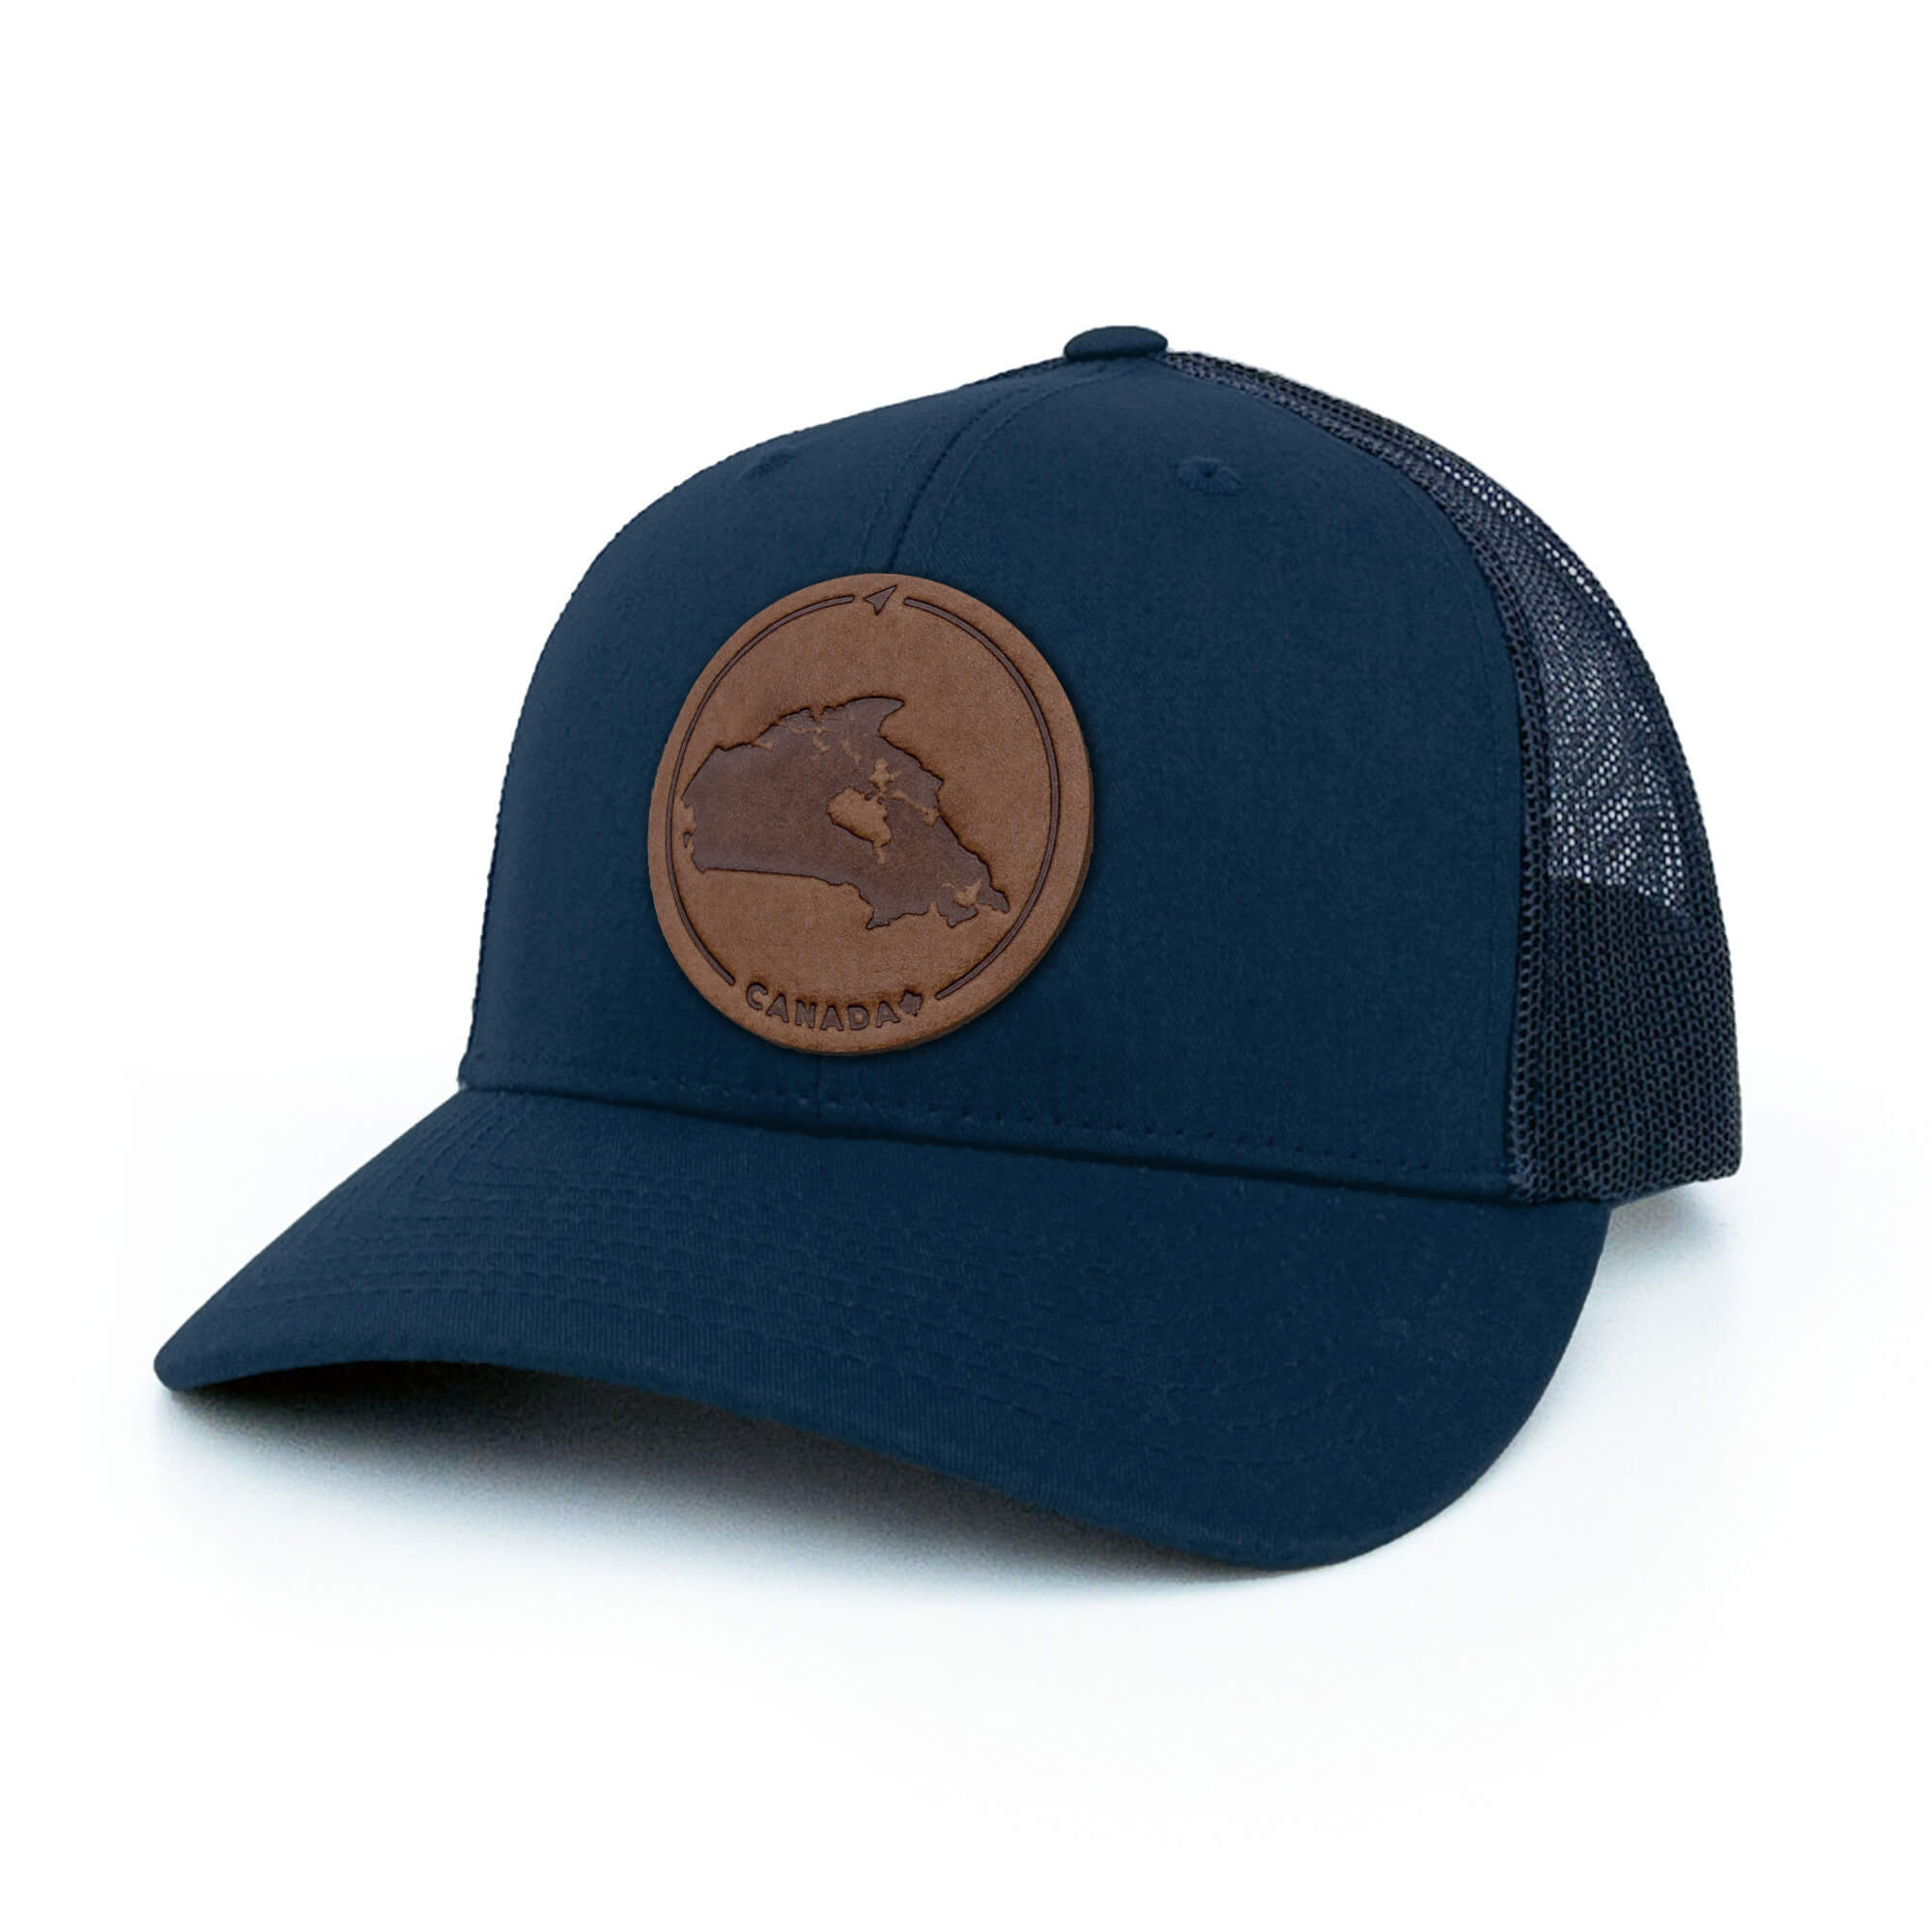 Navy trucker hat with full-grain leather patch of Canada | BLACK-002-002, CHARC-002-002, NAVY-002-002, HGREY-002-002, MOSS-002-002, BROWN-002-002, RED-002-002